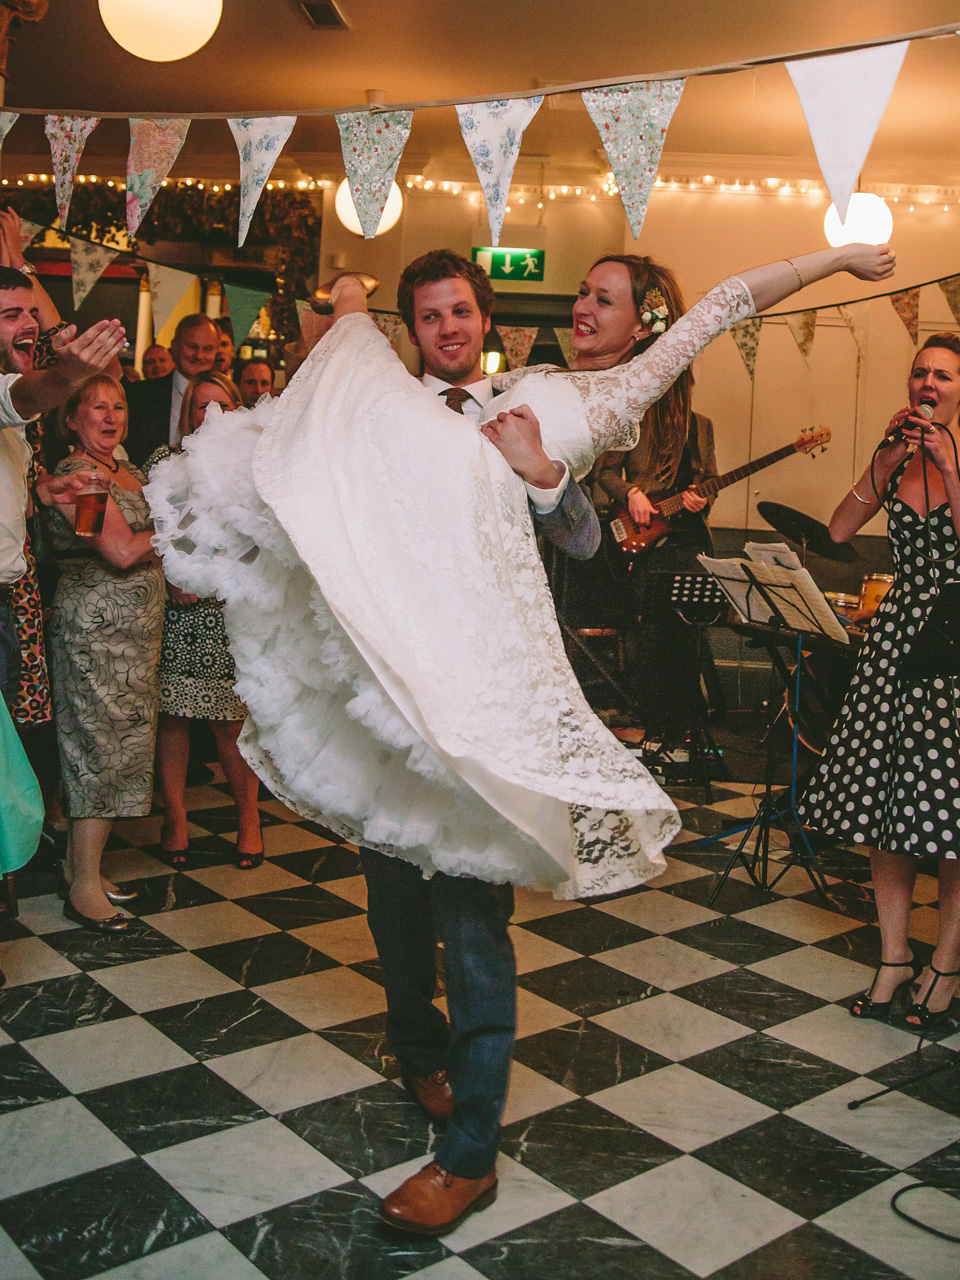 The bride wears a 1950's vintage inspired wedding dress by Fur Coat No Knickers for their very British London pub wedding. Photography by Marc Hayden.